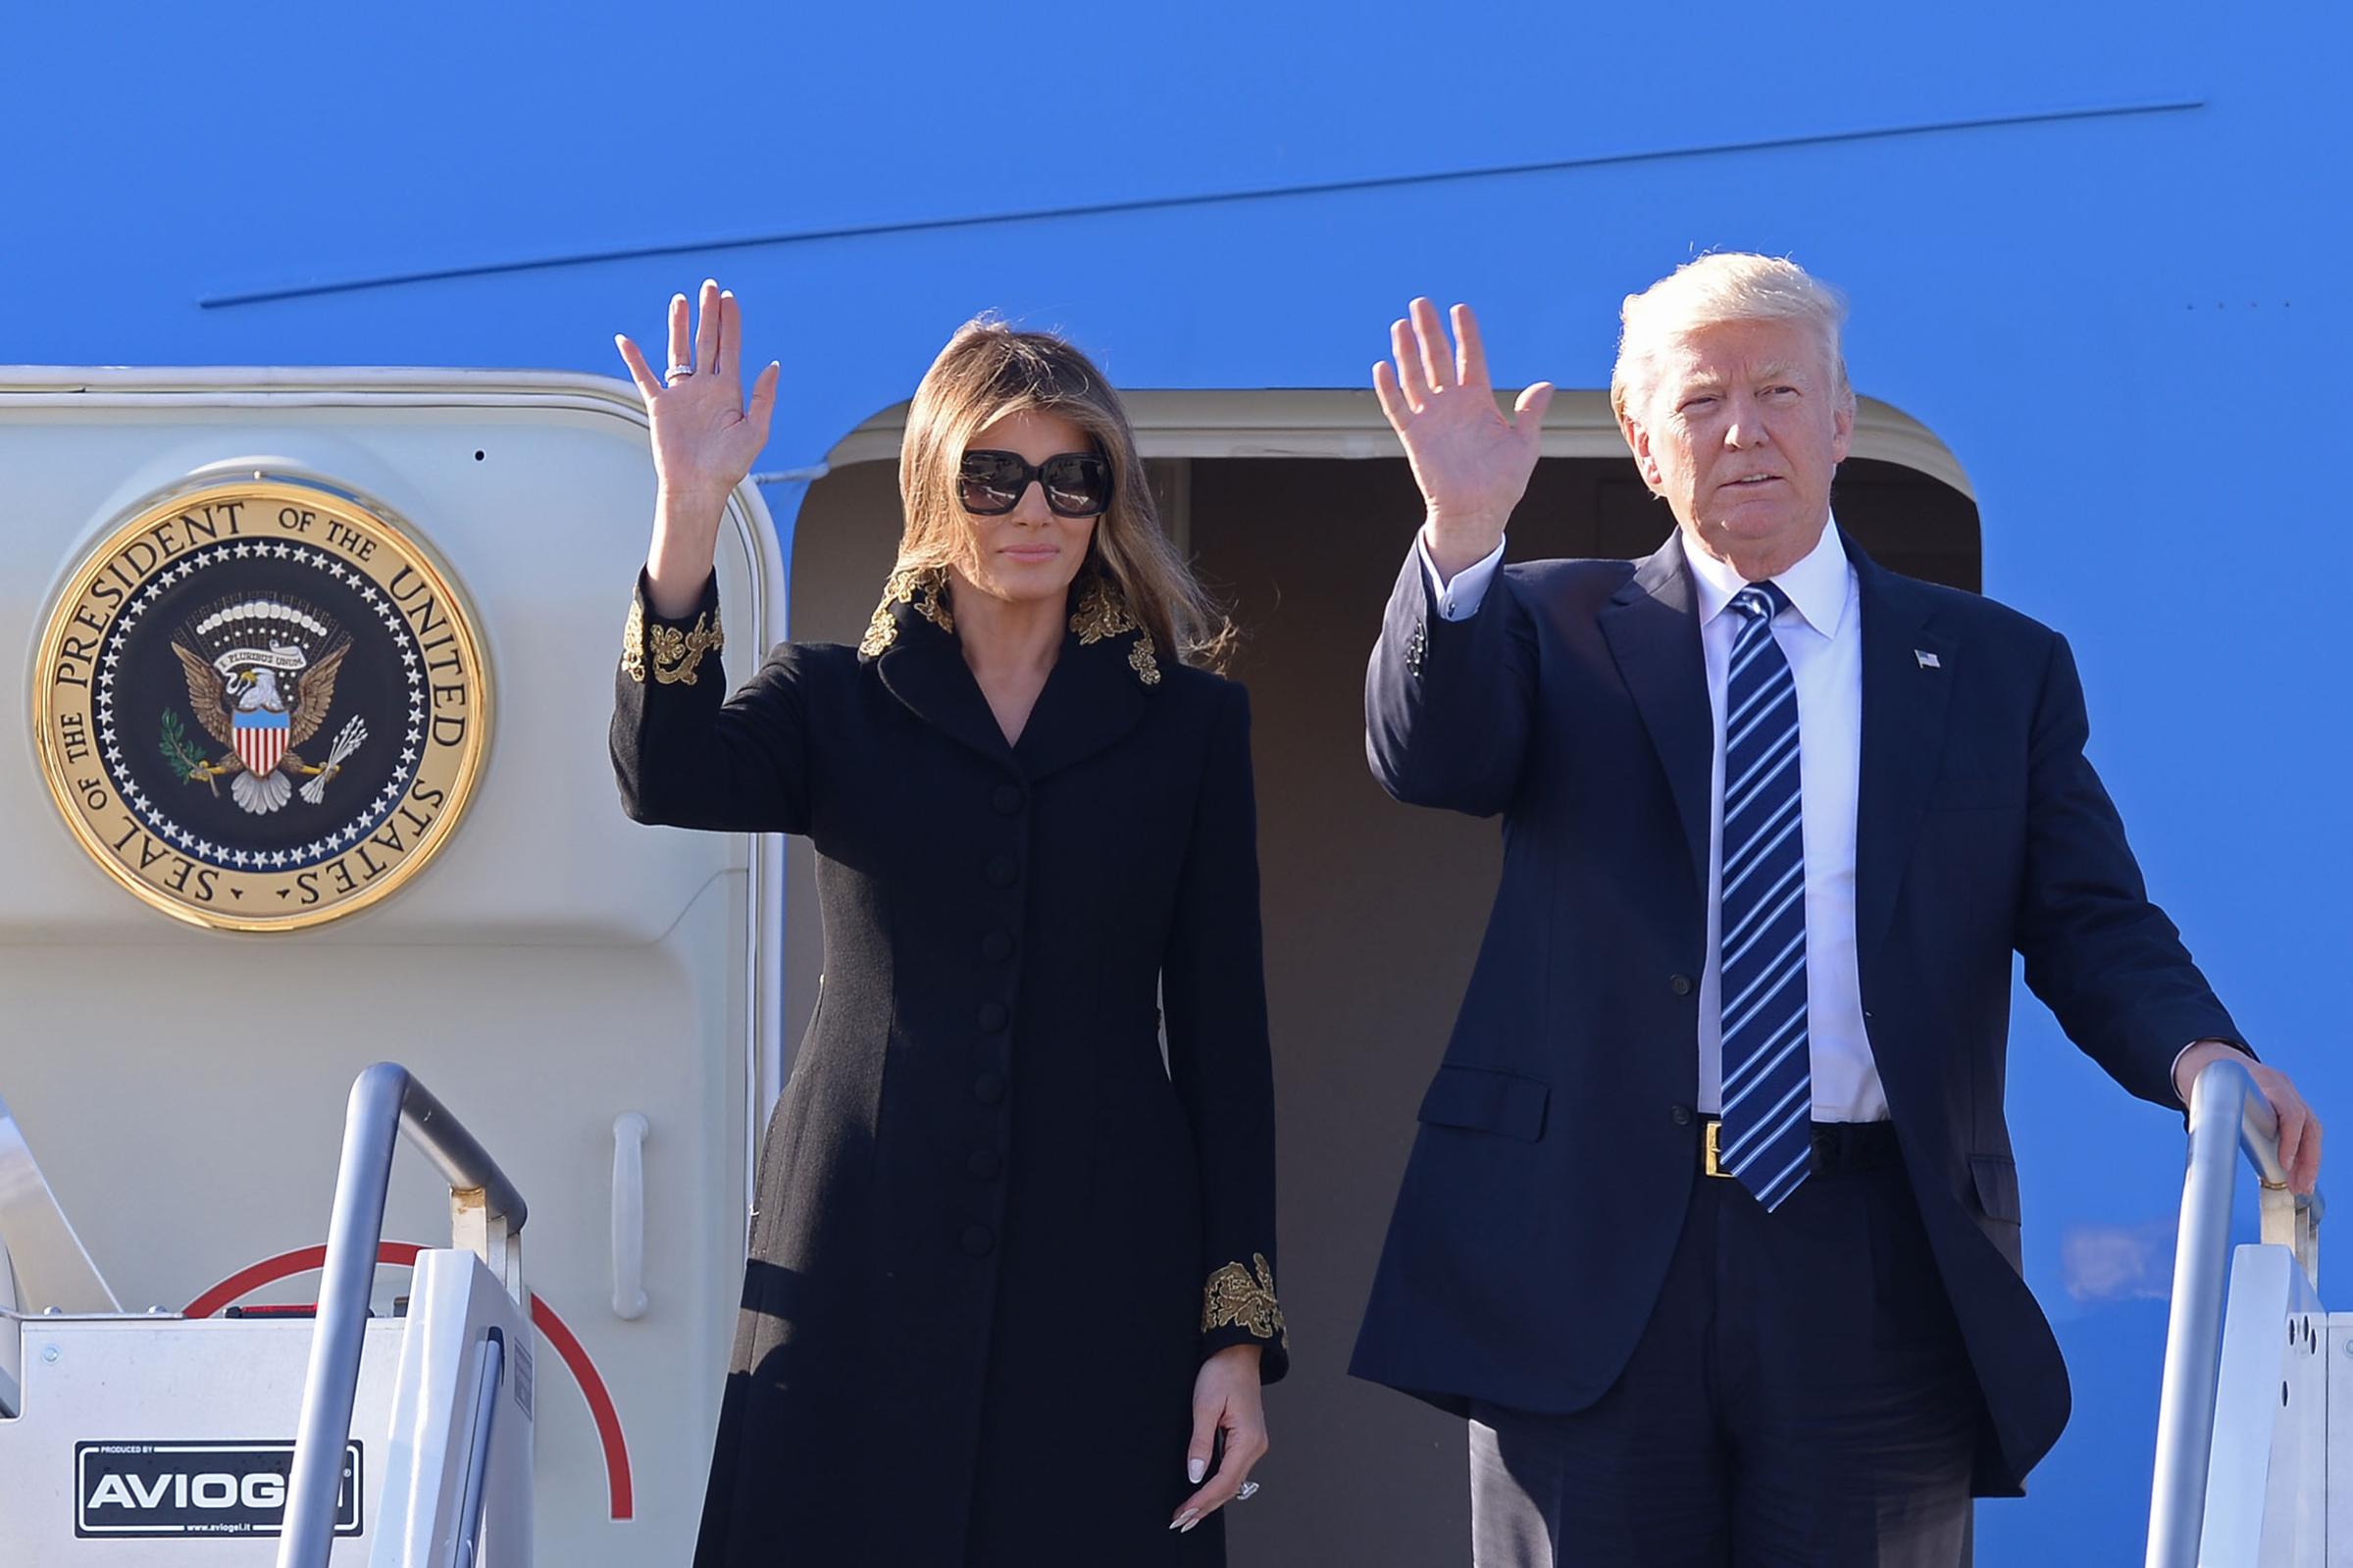 President Donald Trump and First Lady Melania Trump wearin an embellished Dolce & Gabbana coat. step off Air Force One upon arrival at Rome's Fiumicino Airport on May 23, 2017.